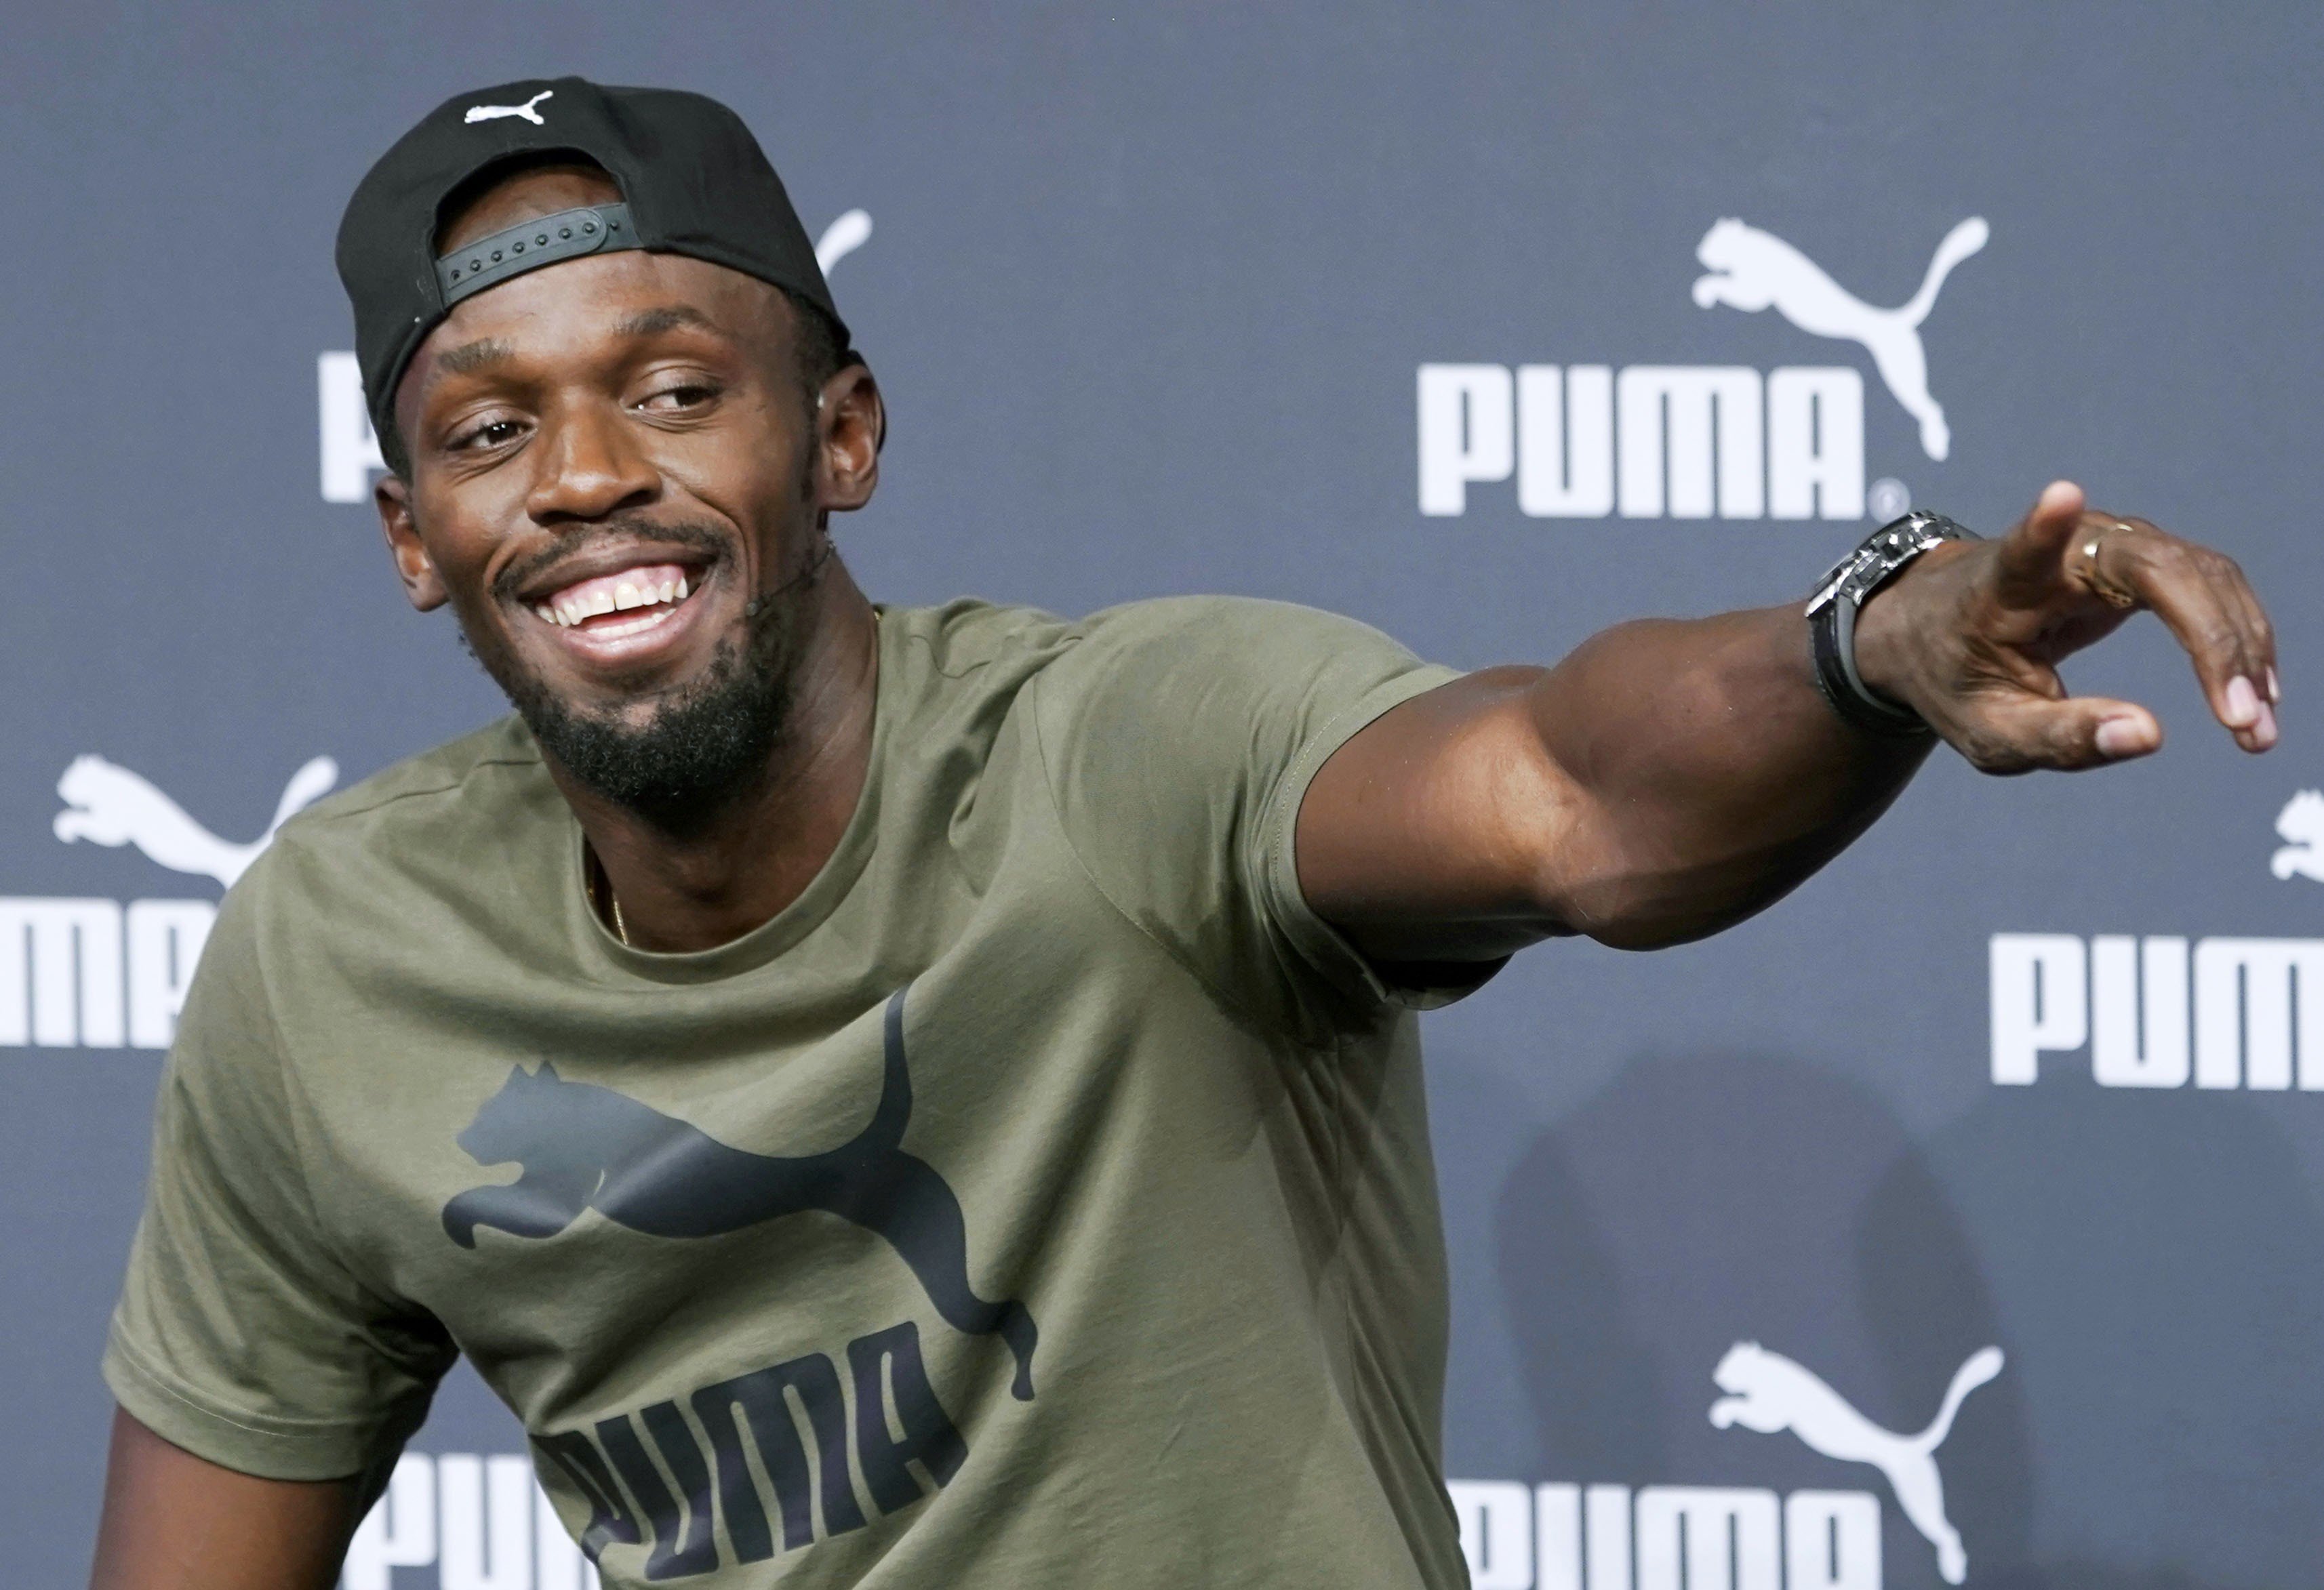 Usain Bolt points at a reporter to accept a question during a press conference in London. Photo: Kyodo